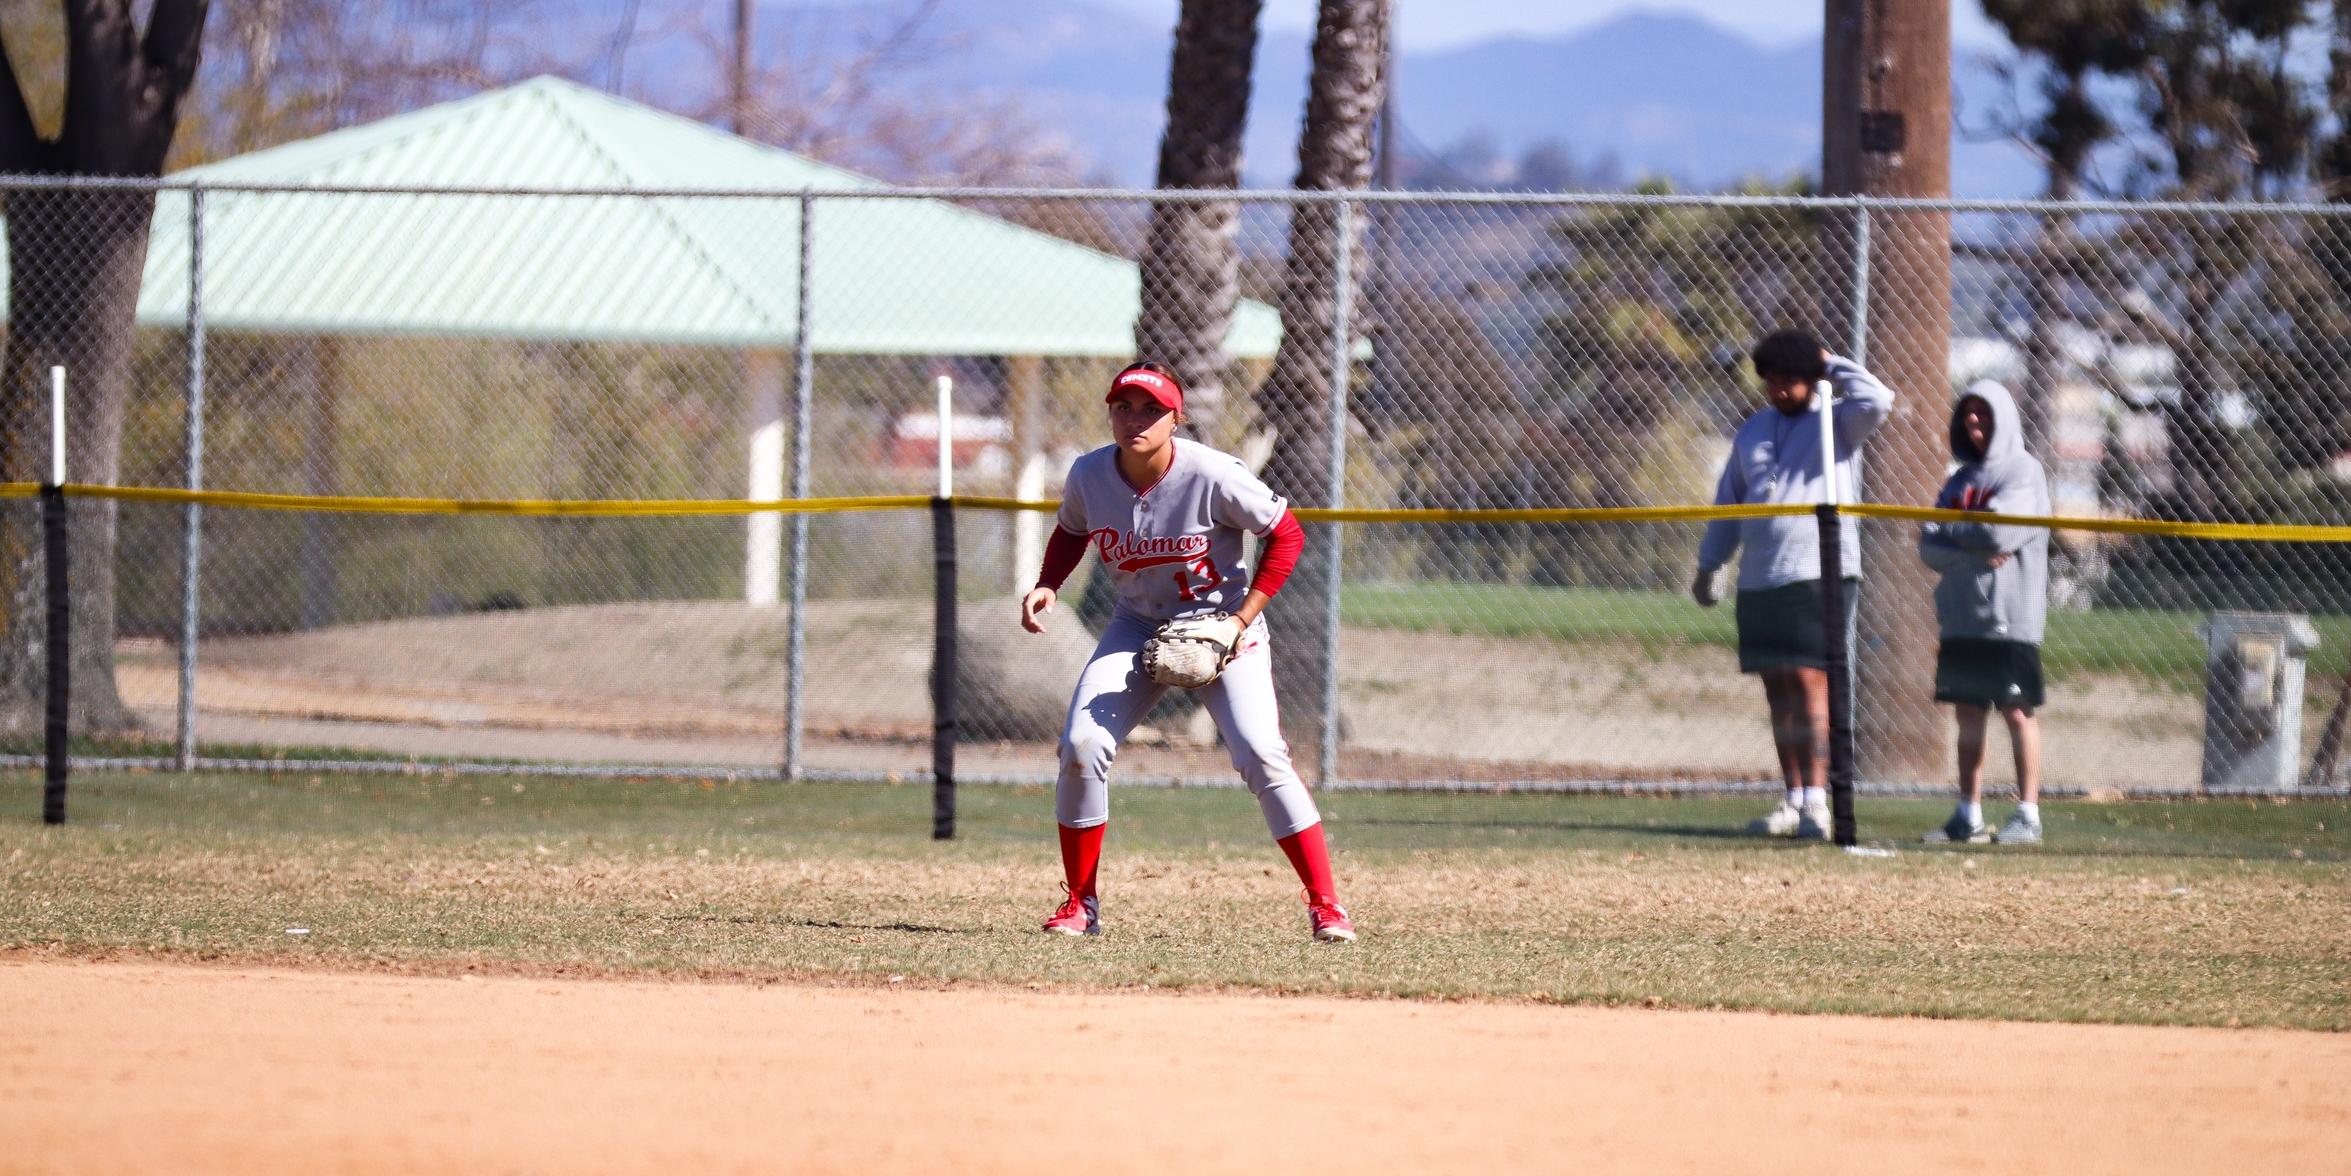 Faith Steffany had six putouts against El Camino College. Photo by Cara Heise.